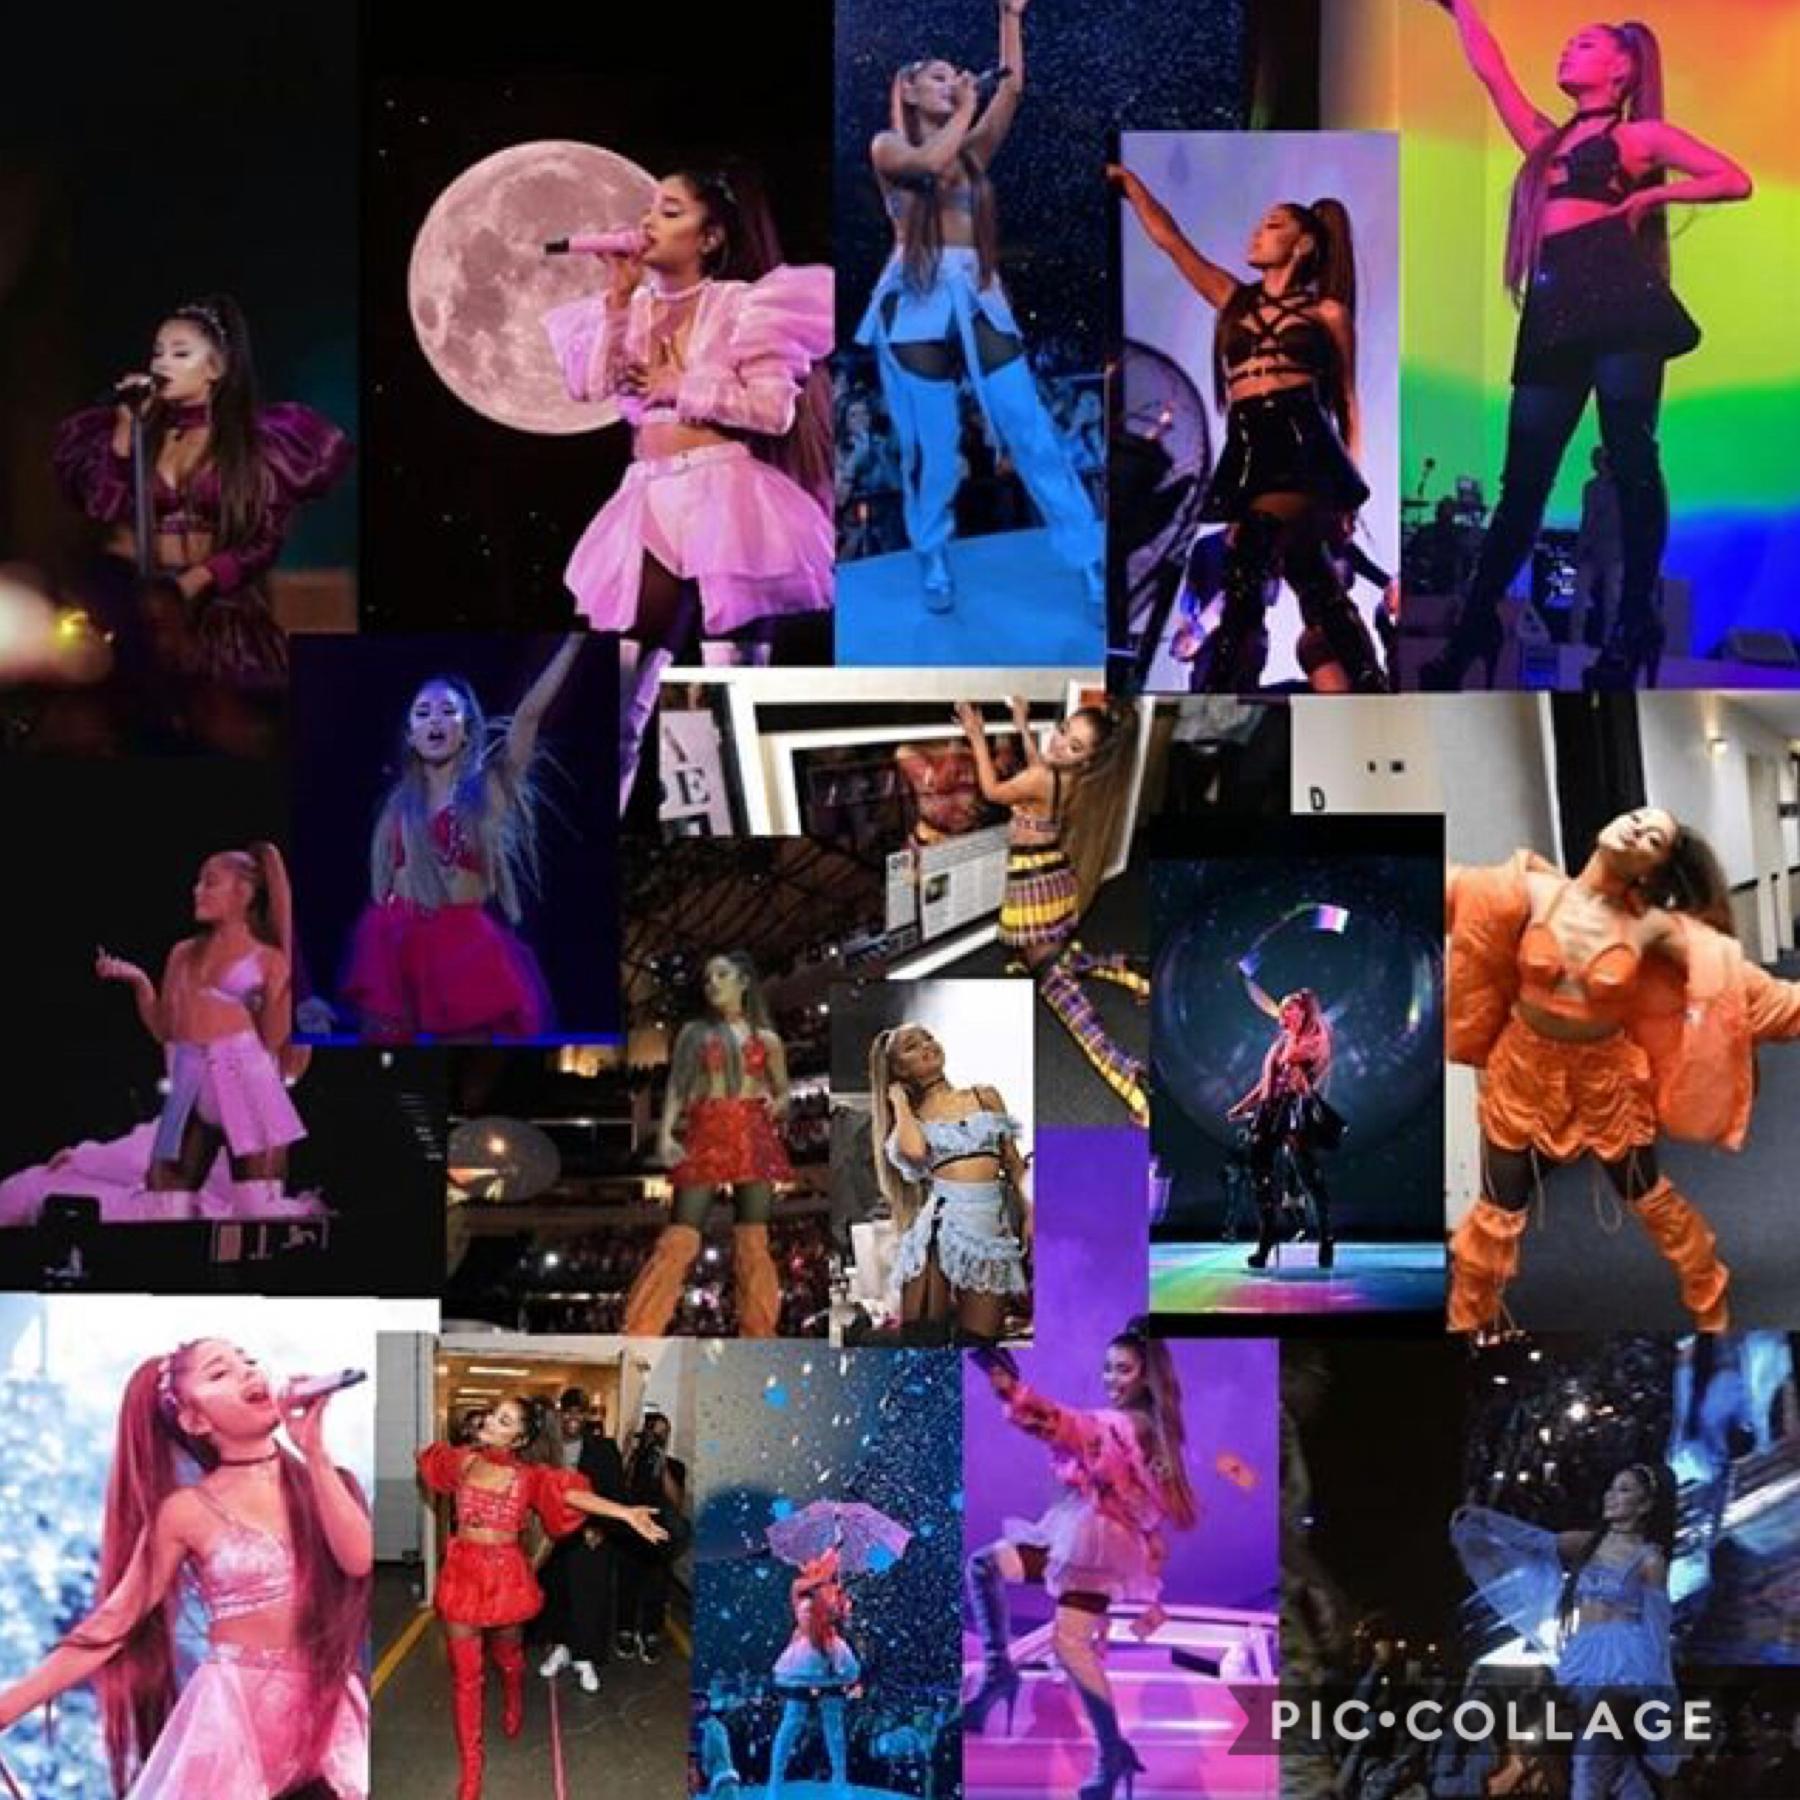 All of Ariana sweetener world tour outfits in one collage/edit❤️😭✨